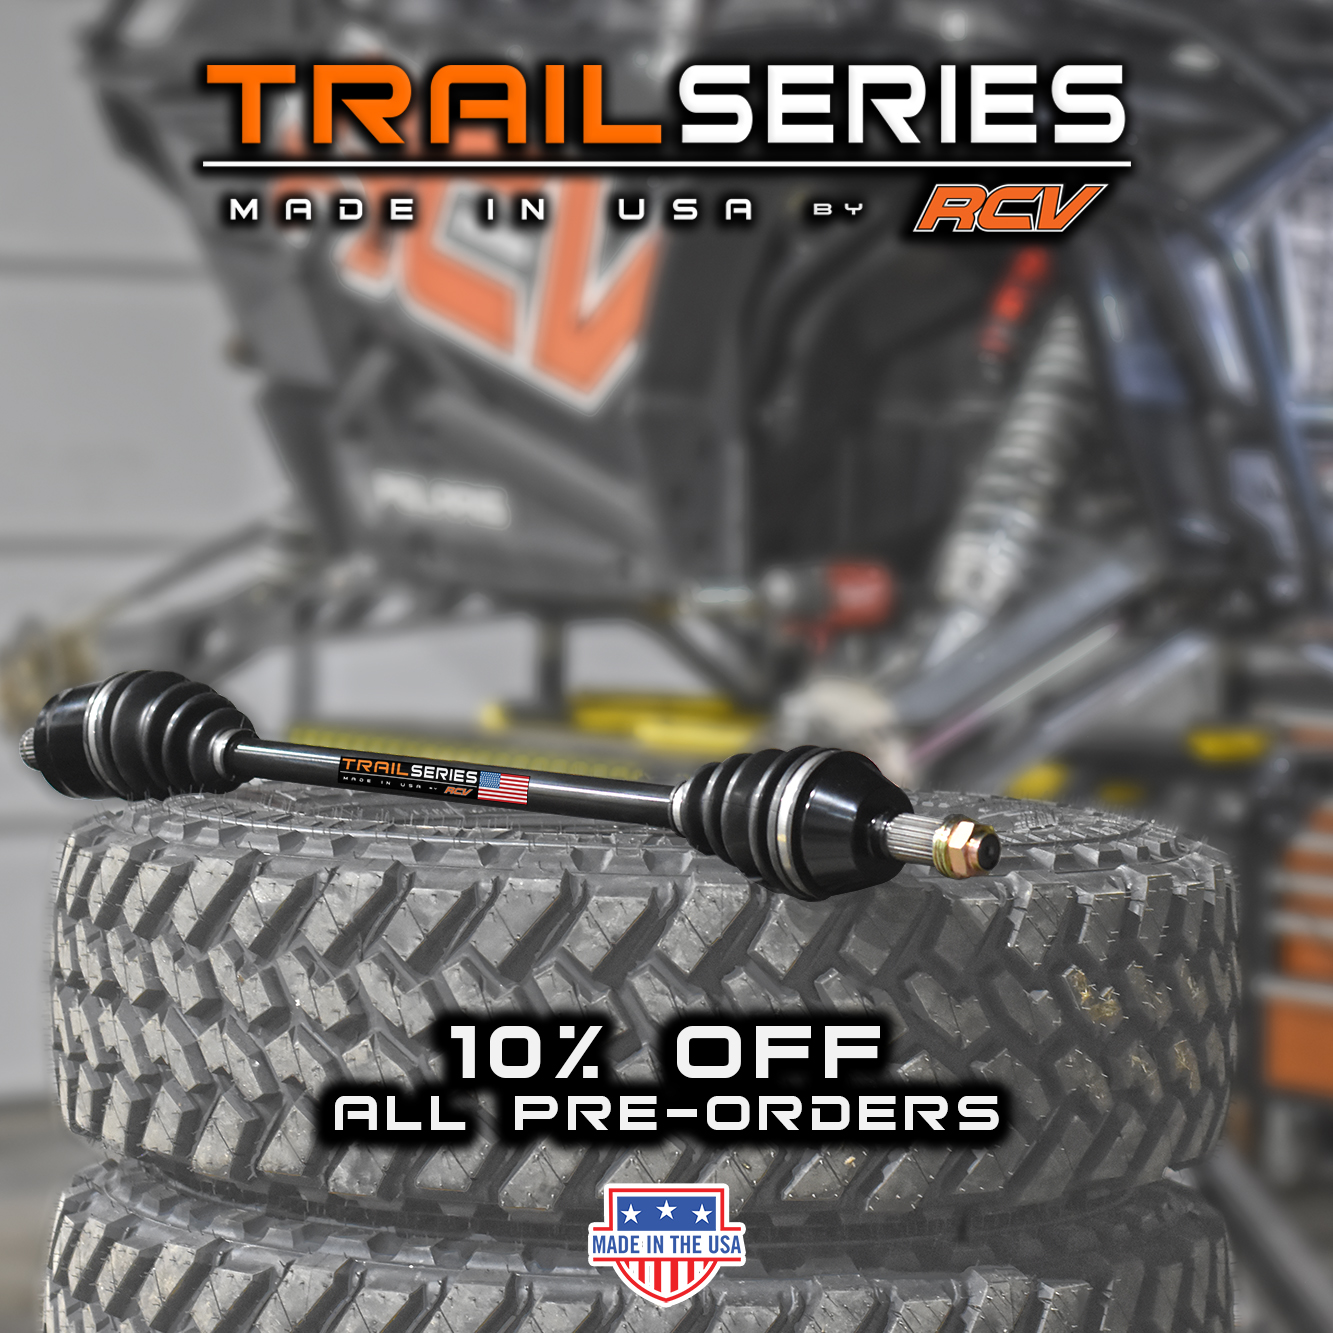 Introducing the Trail Series UTV axle by RCV